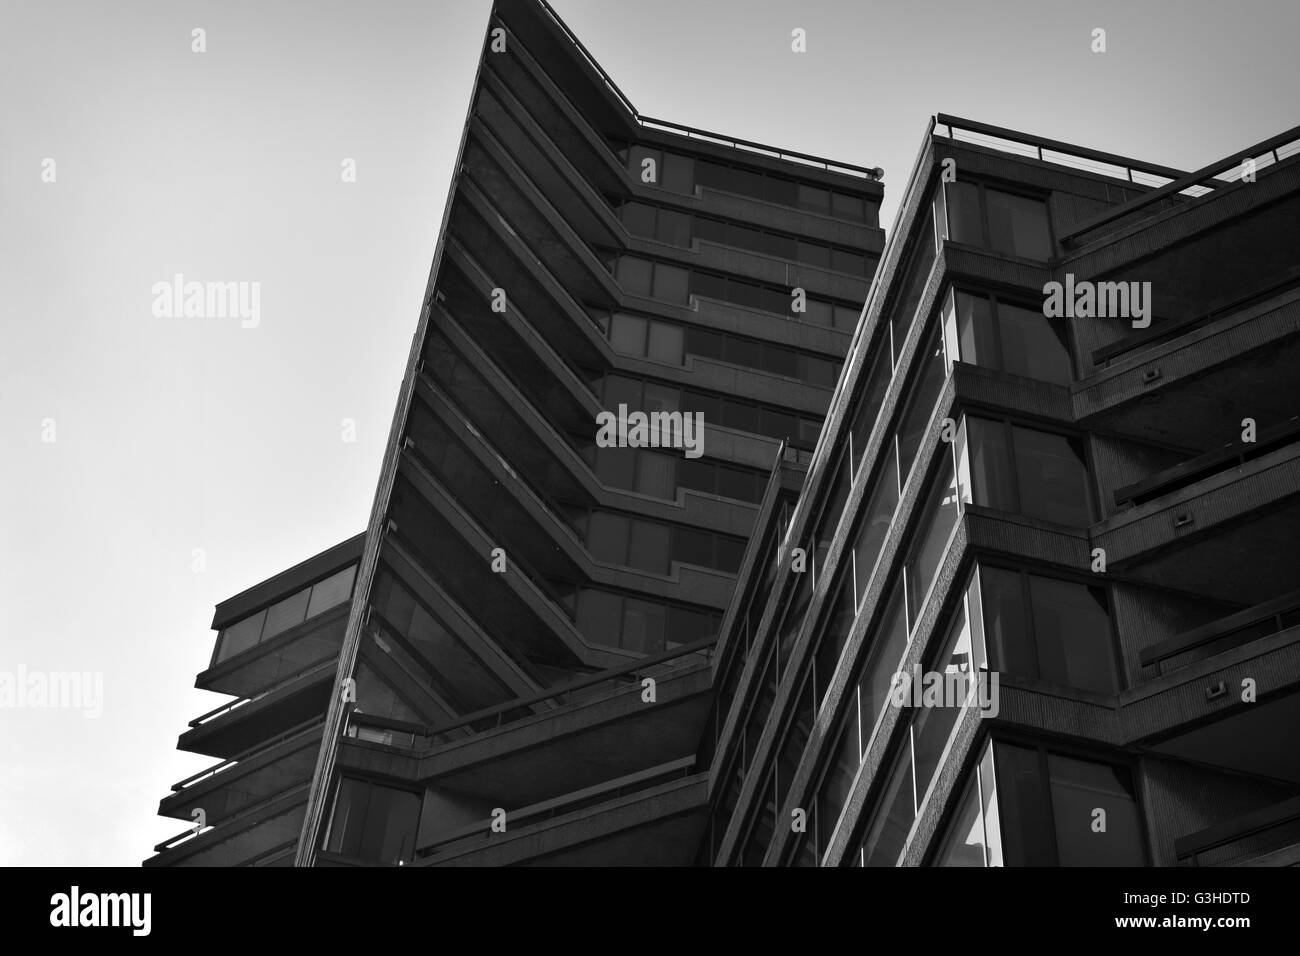 Abstract Architecture Stock Photo